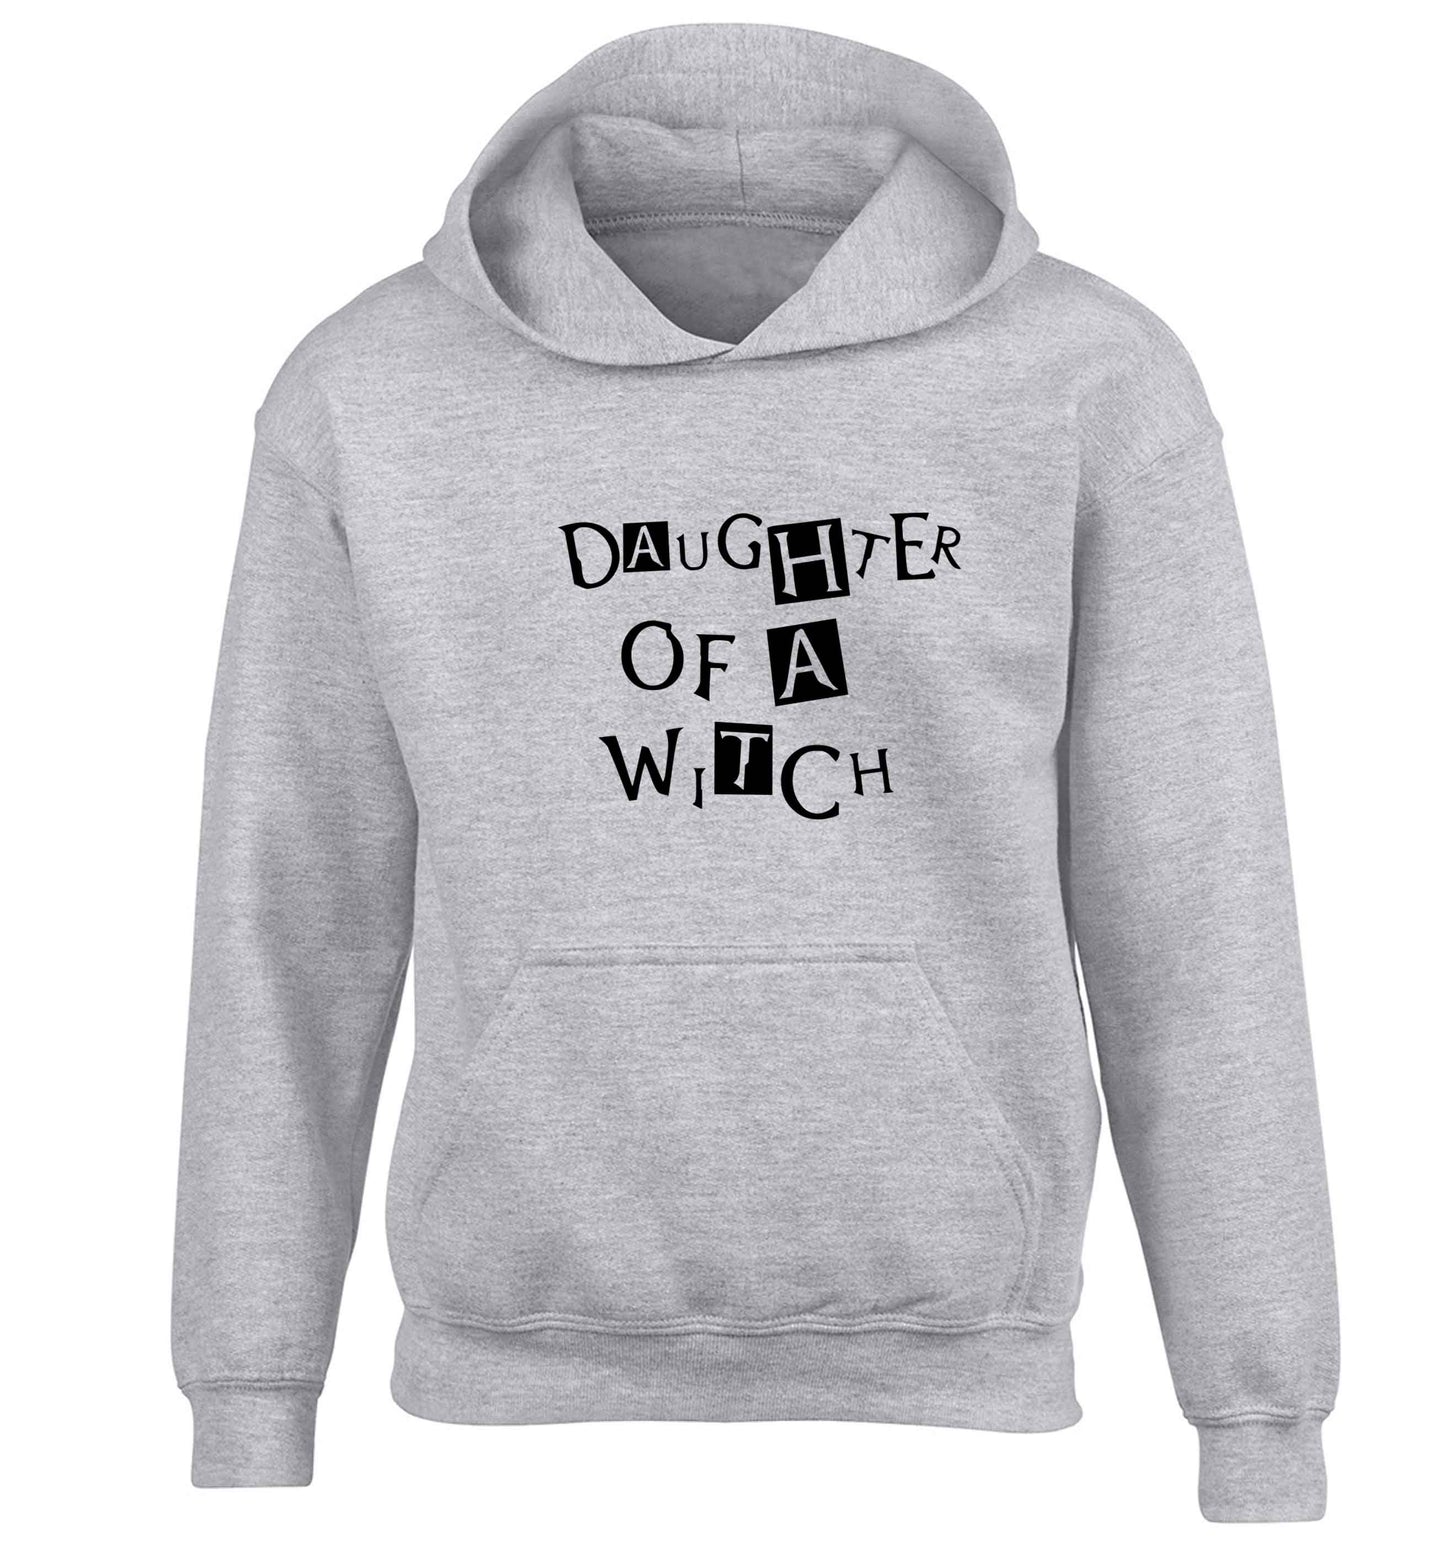 Daughter of a witch children's grey hoodie 12-13 Years